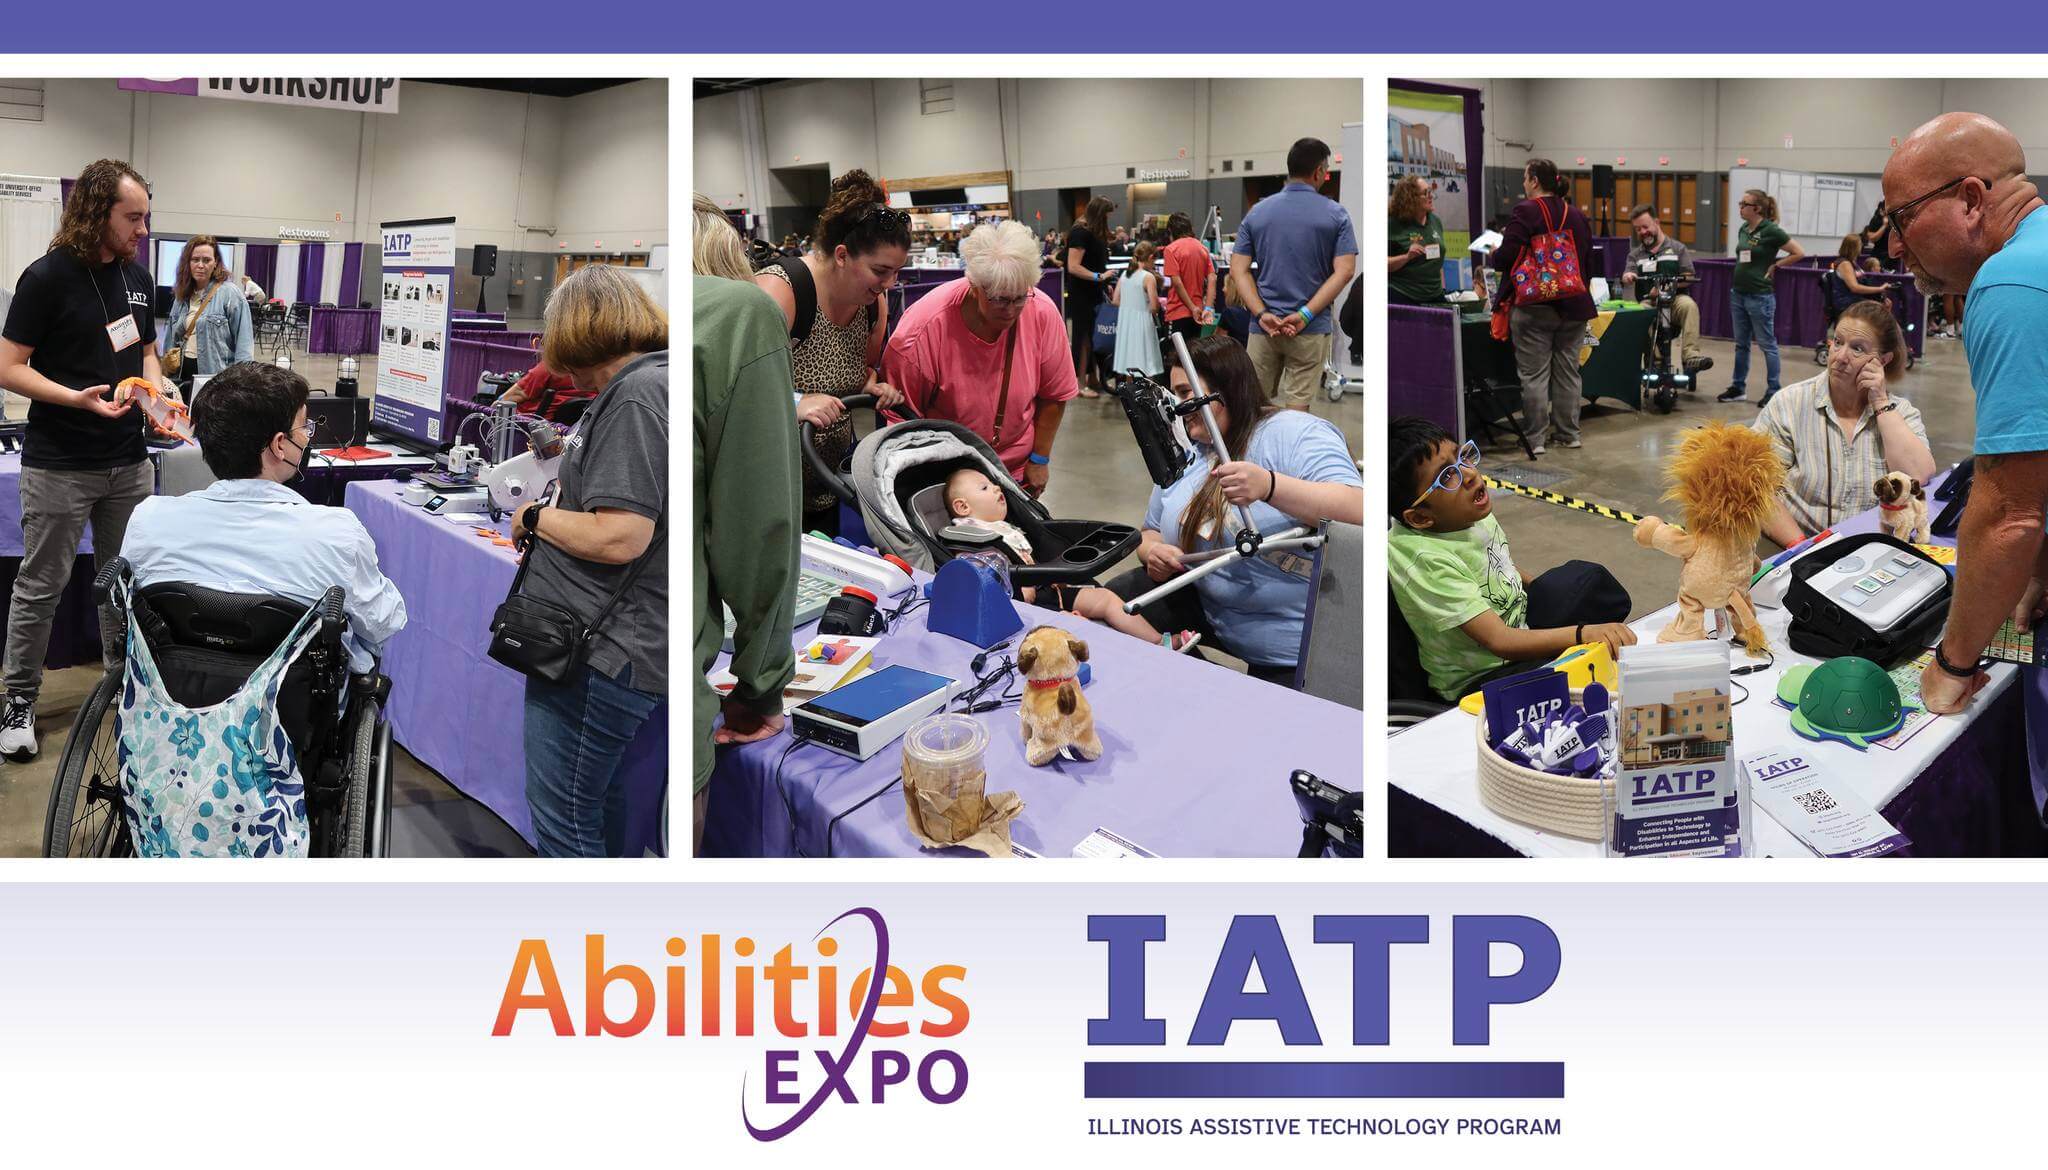 IATP at the Abilities Expo